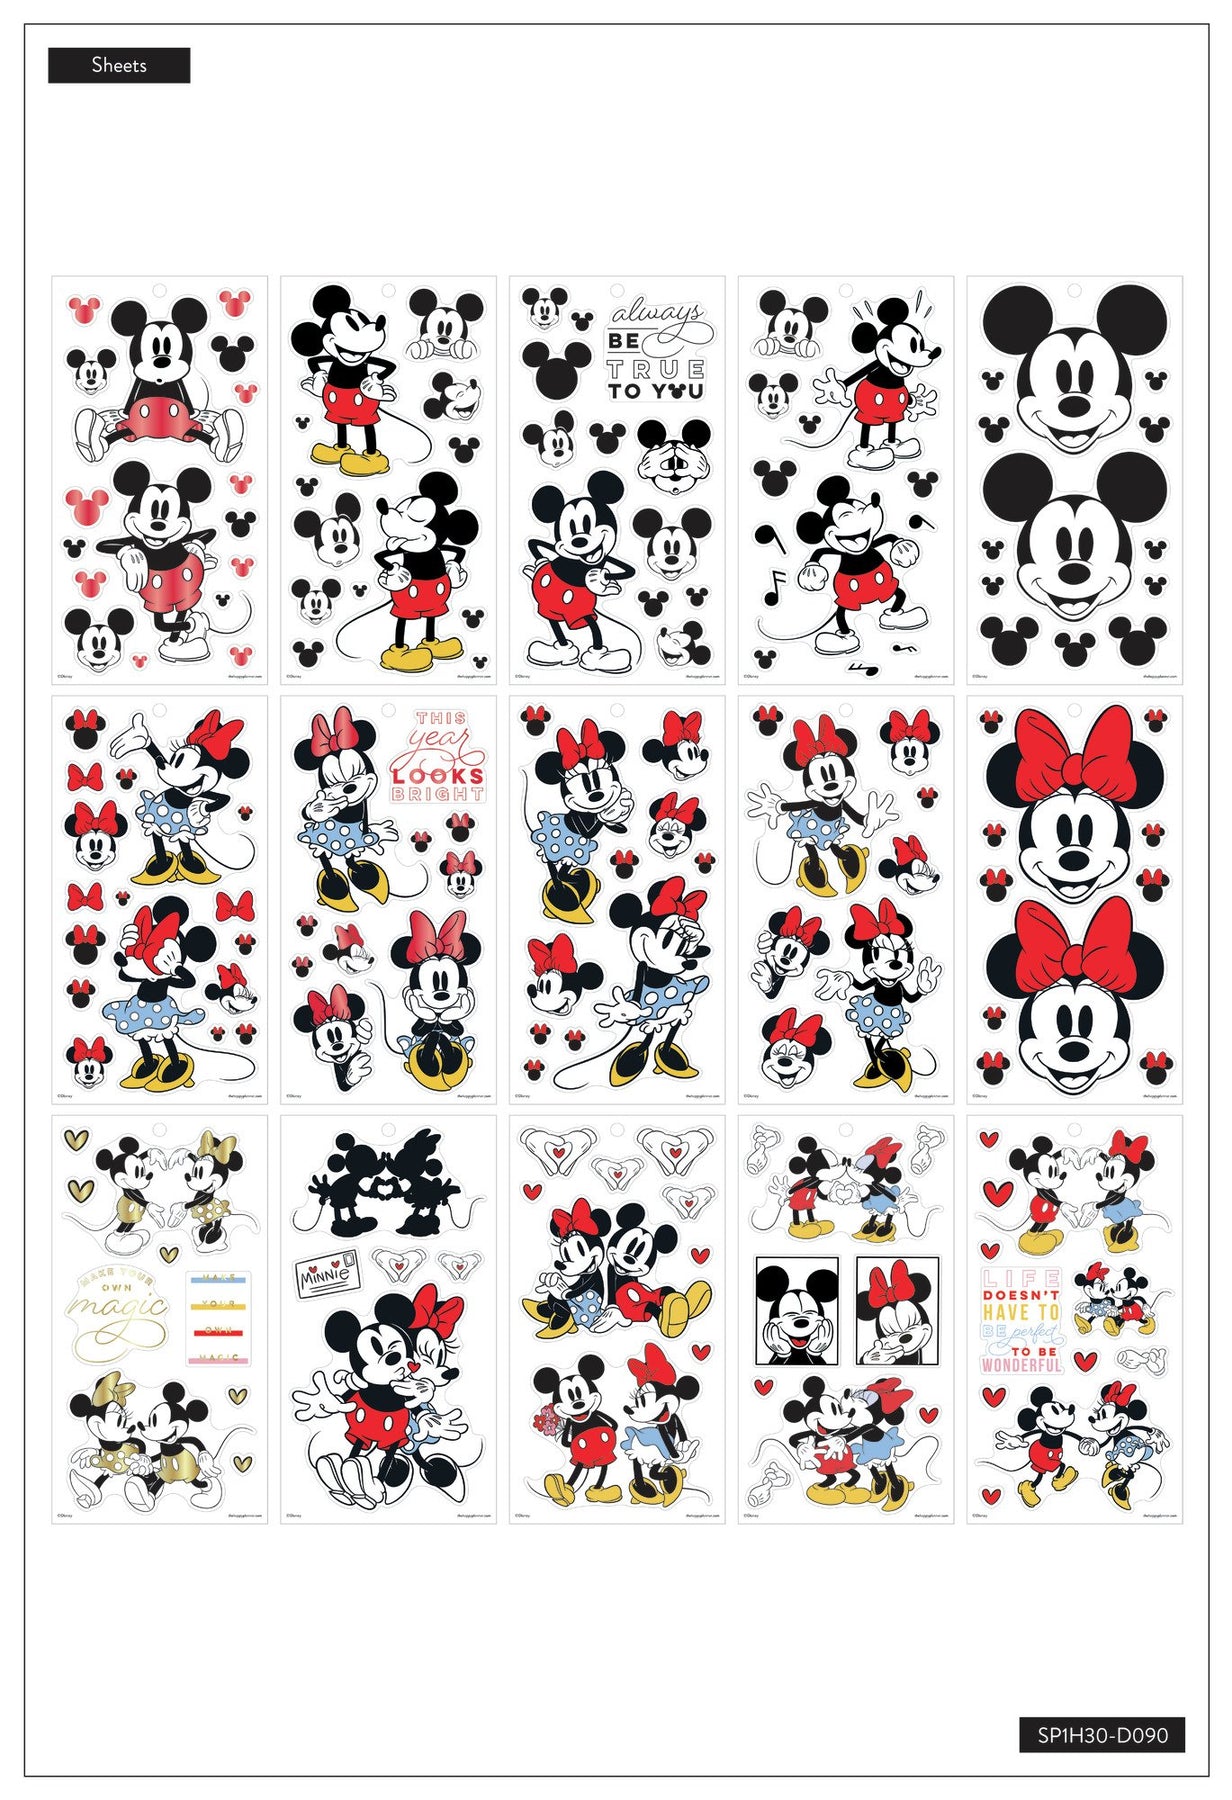 Minnie Mouse Stickers (12 Sheet Book), Minnie Mouse